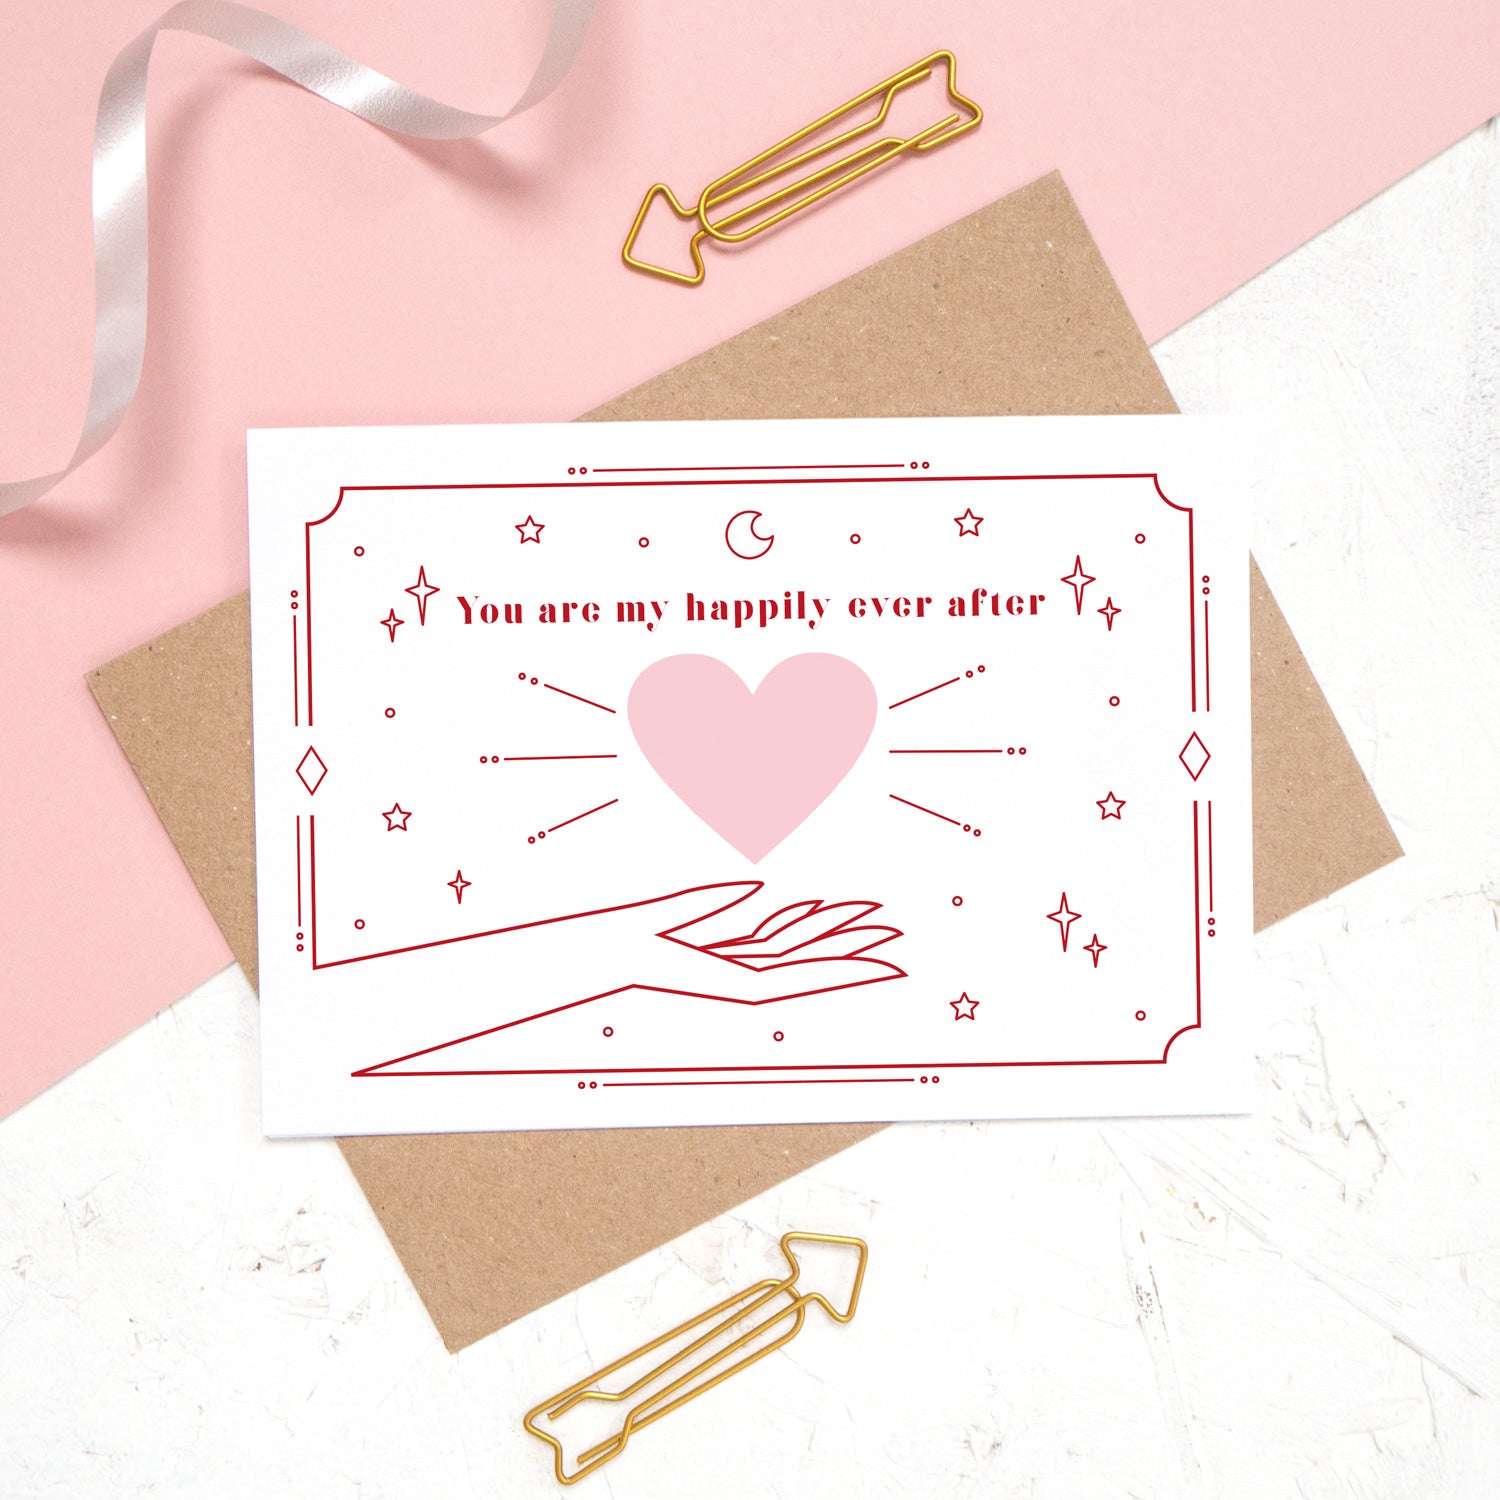 This card features the phrase 'you are my happily ever after' with a heart and cosmic decor. The perfect card for an anniversary or the valentines before your wedding day!